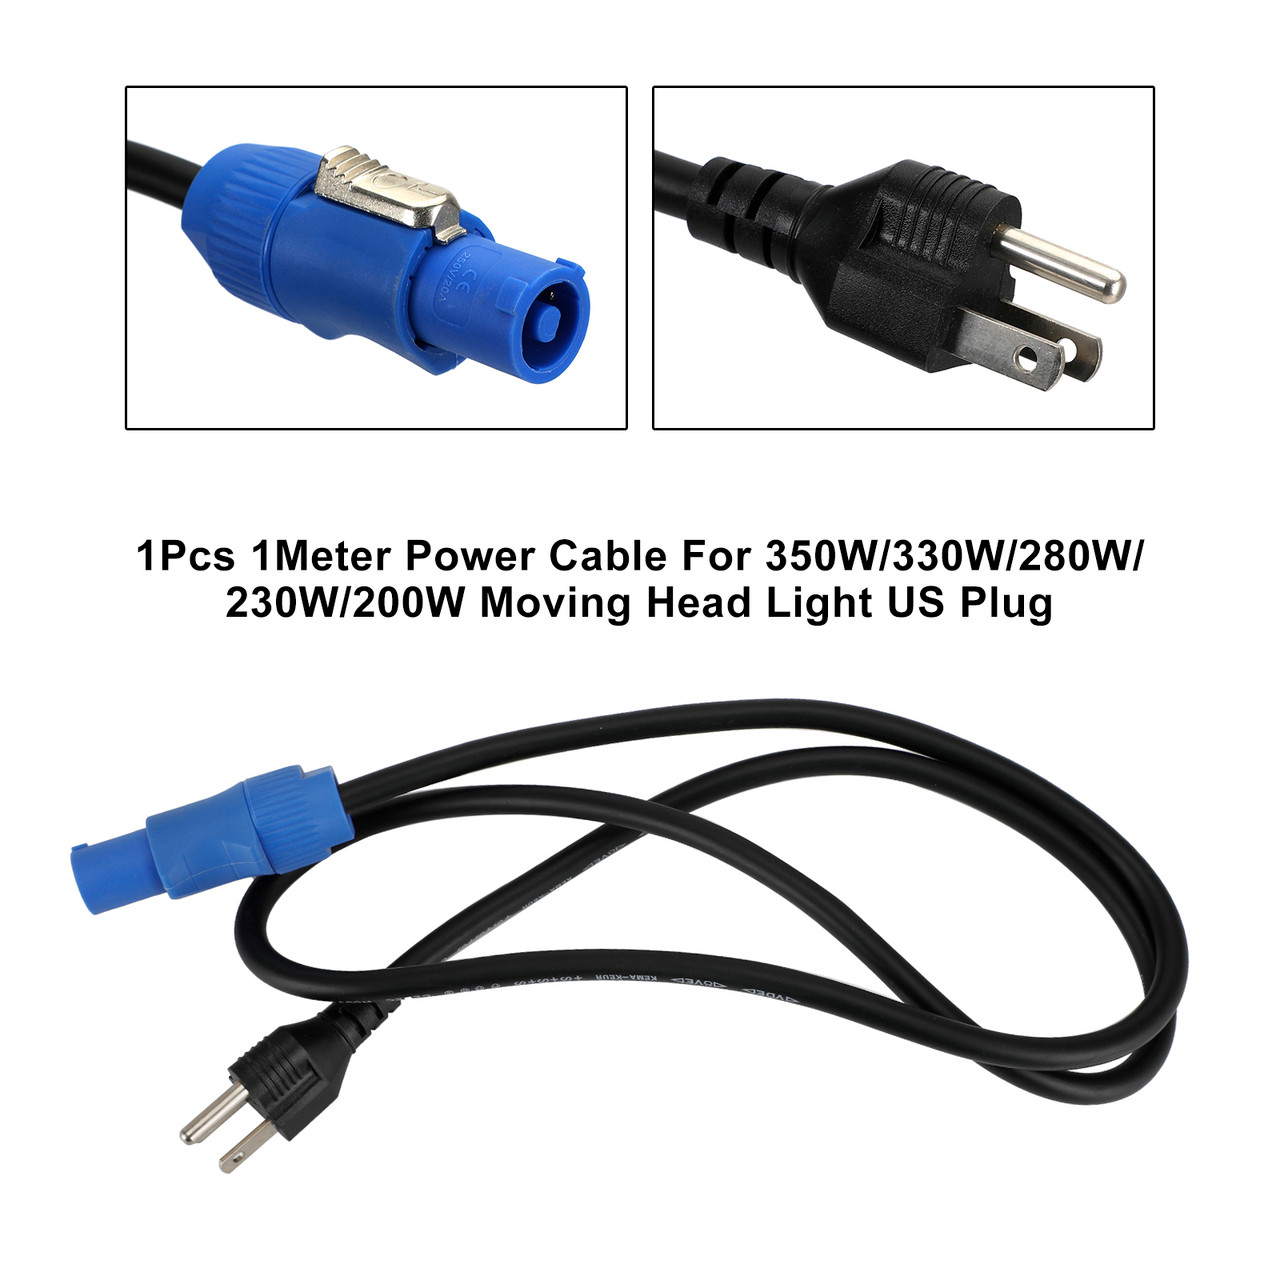 1Pcs 1Meter Power Cable For 350W/330W/280W/230W/200W Moving Head Light US Plug